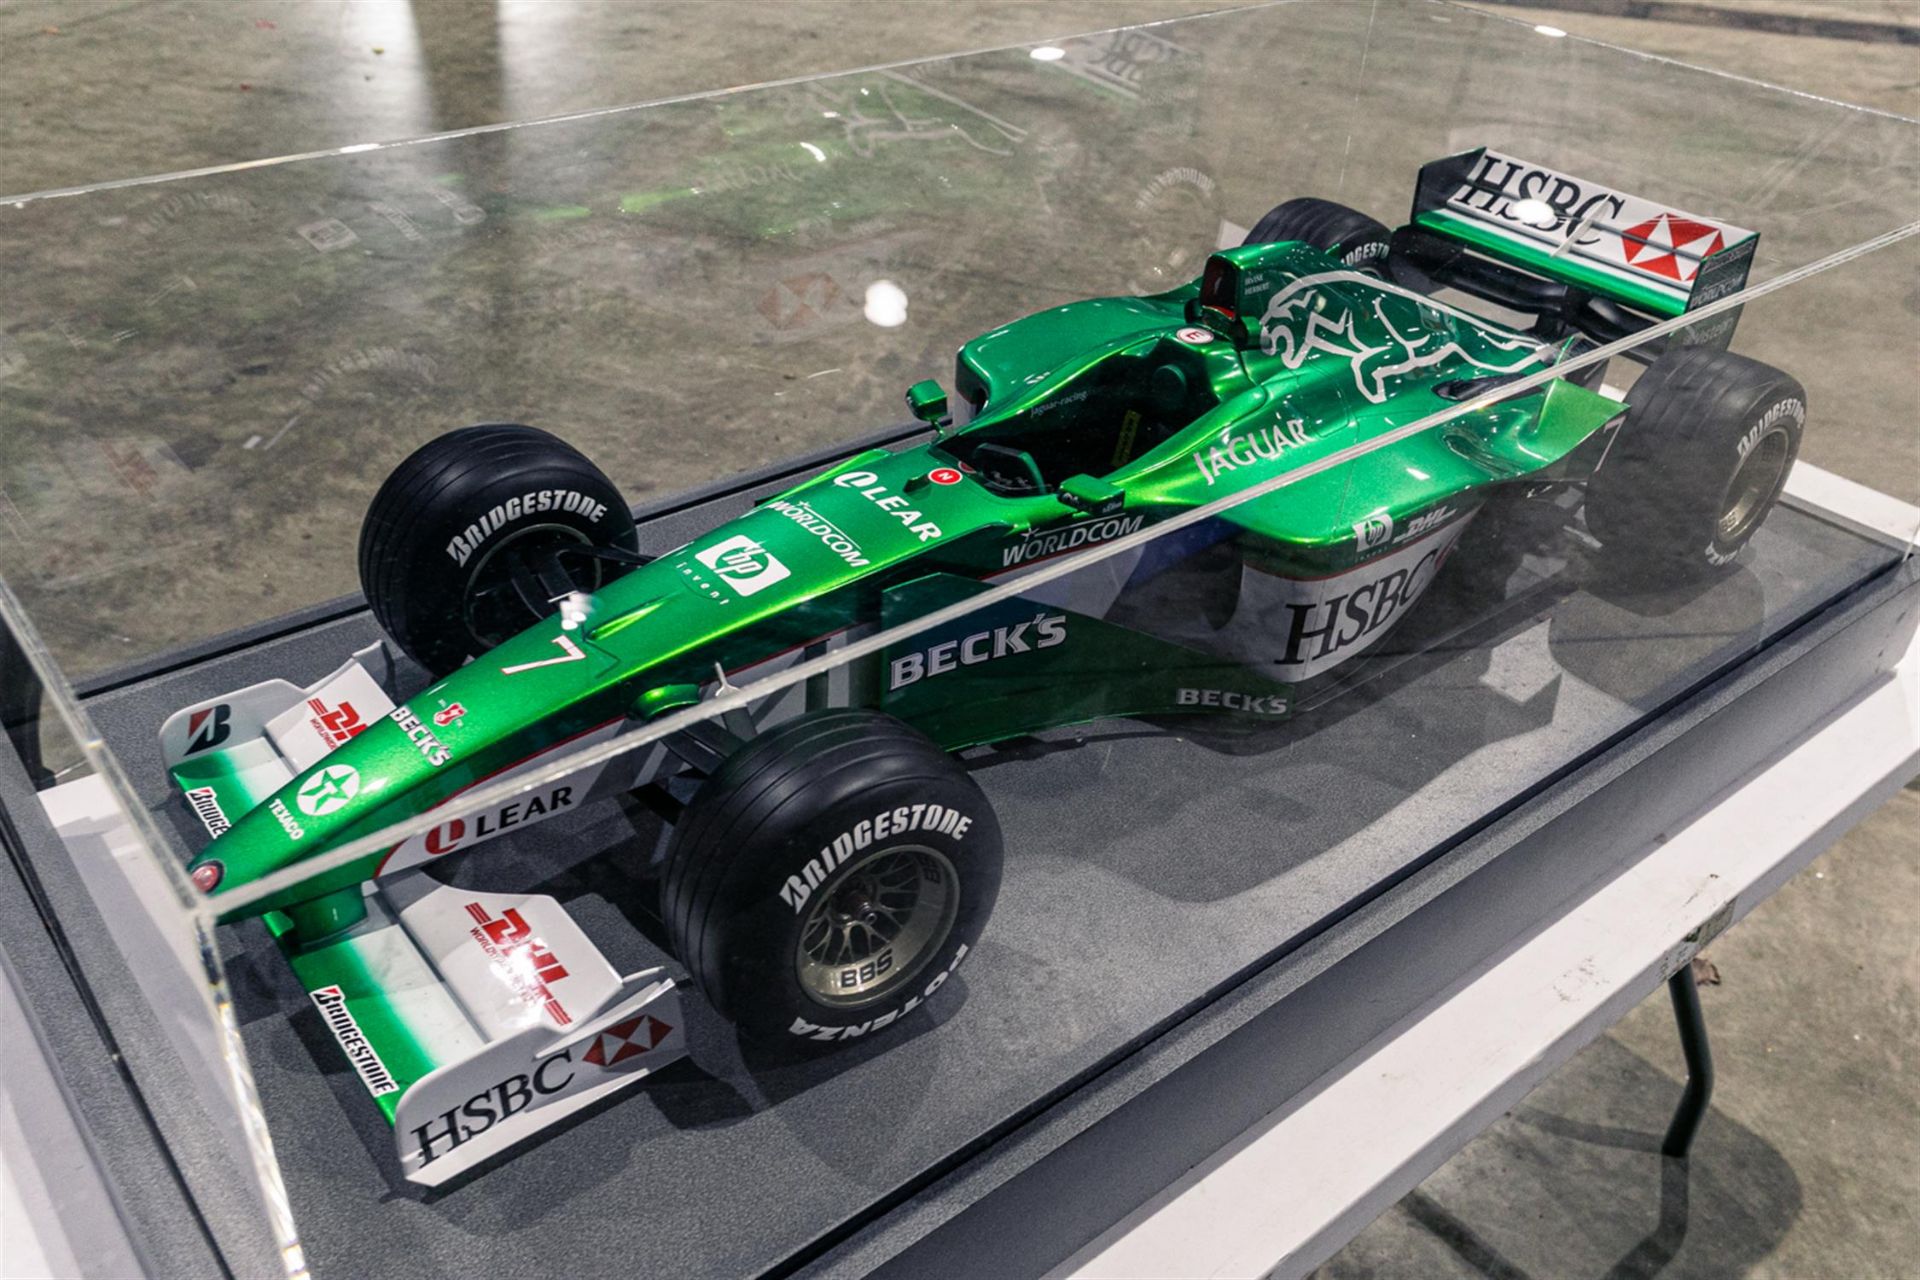 An Original 1:4 Scale Limited Edition Promotional Model of the 2000 Jaguar R1 - Image 2 of 2